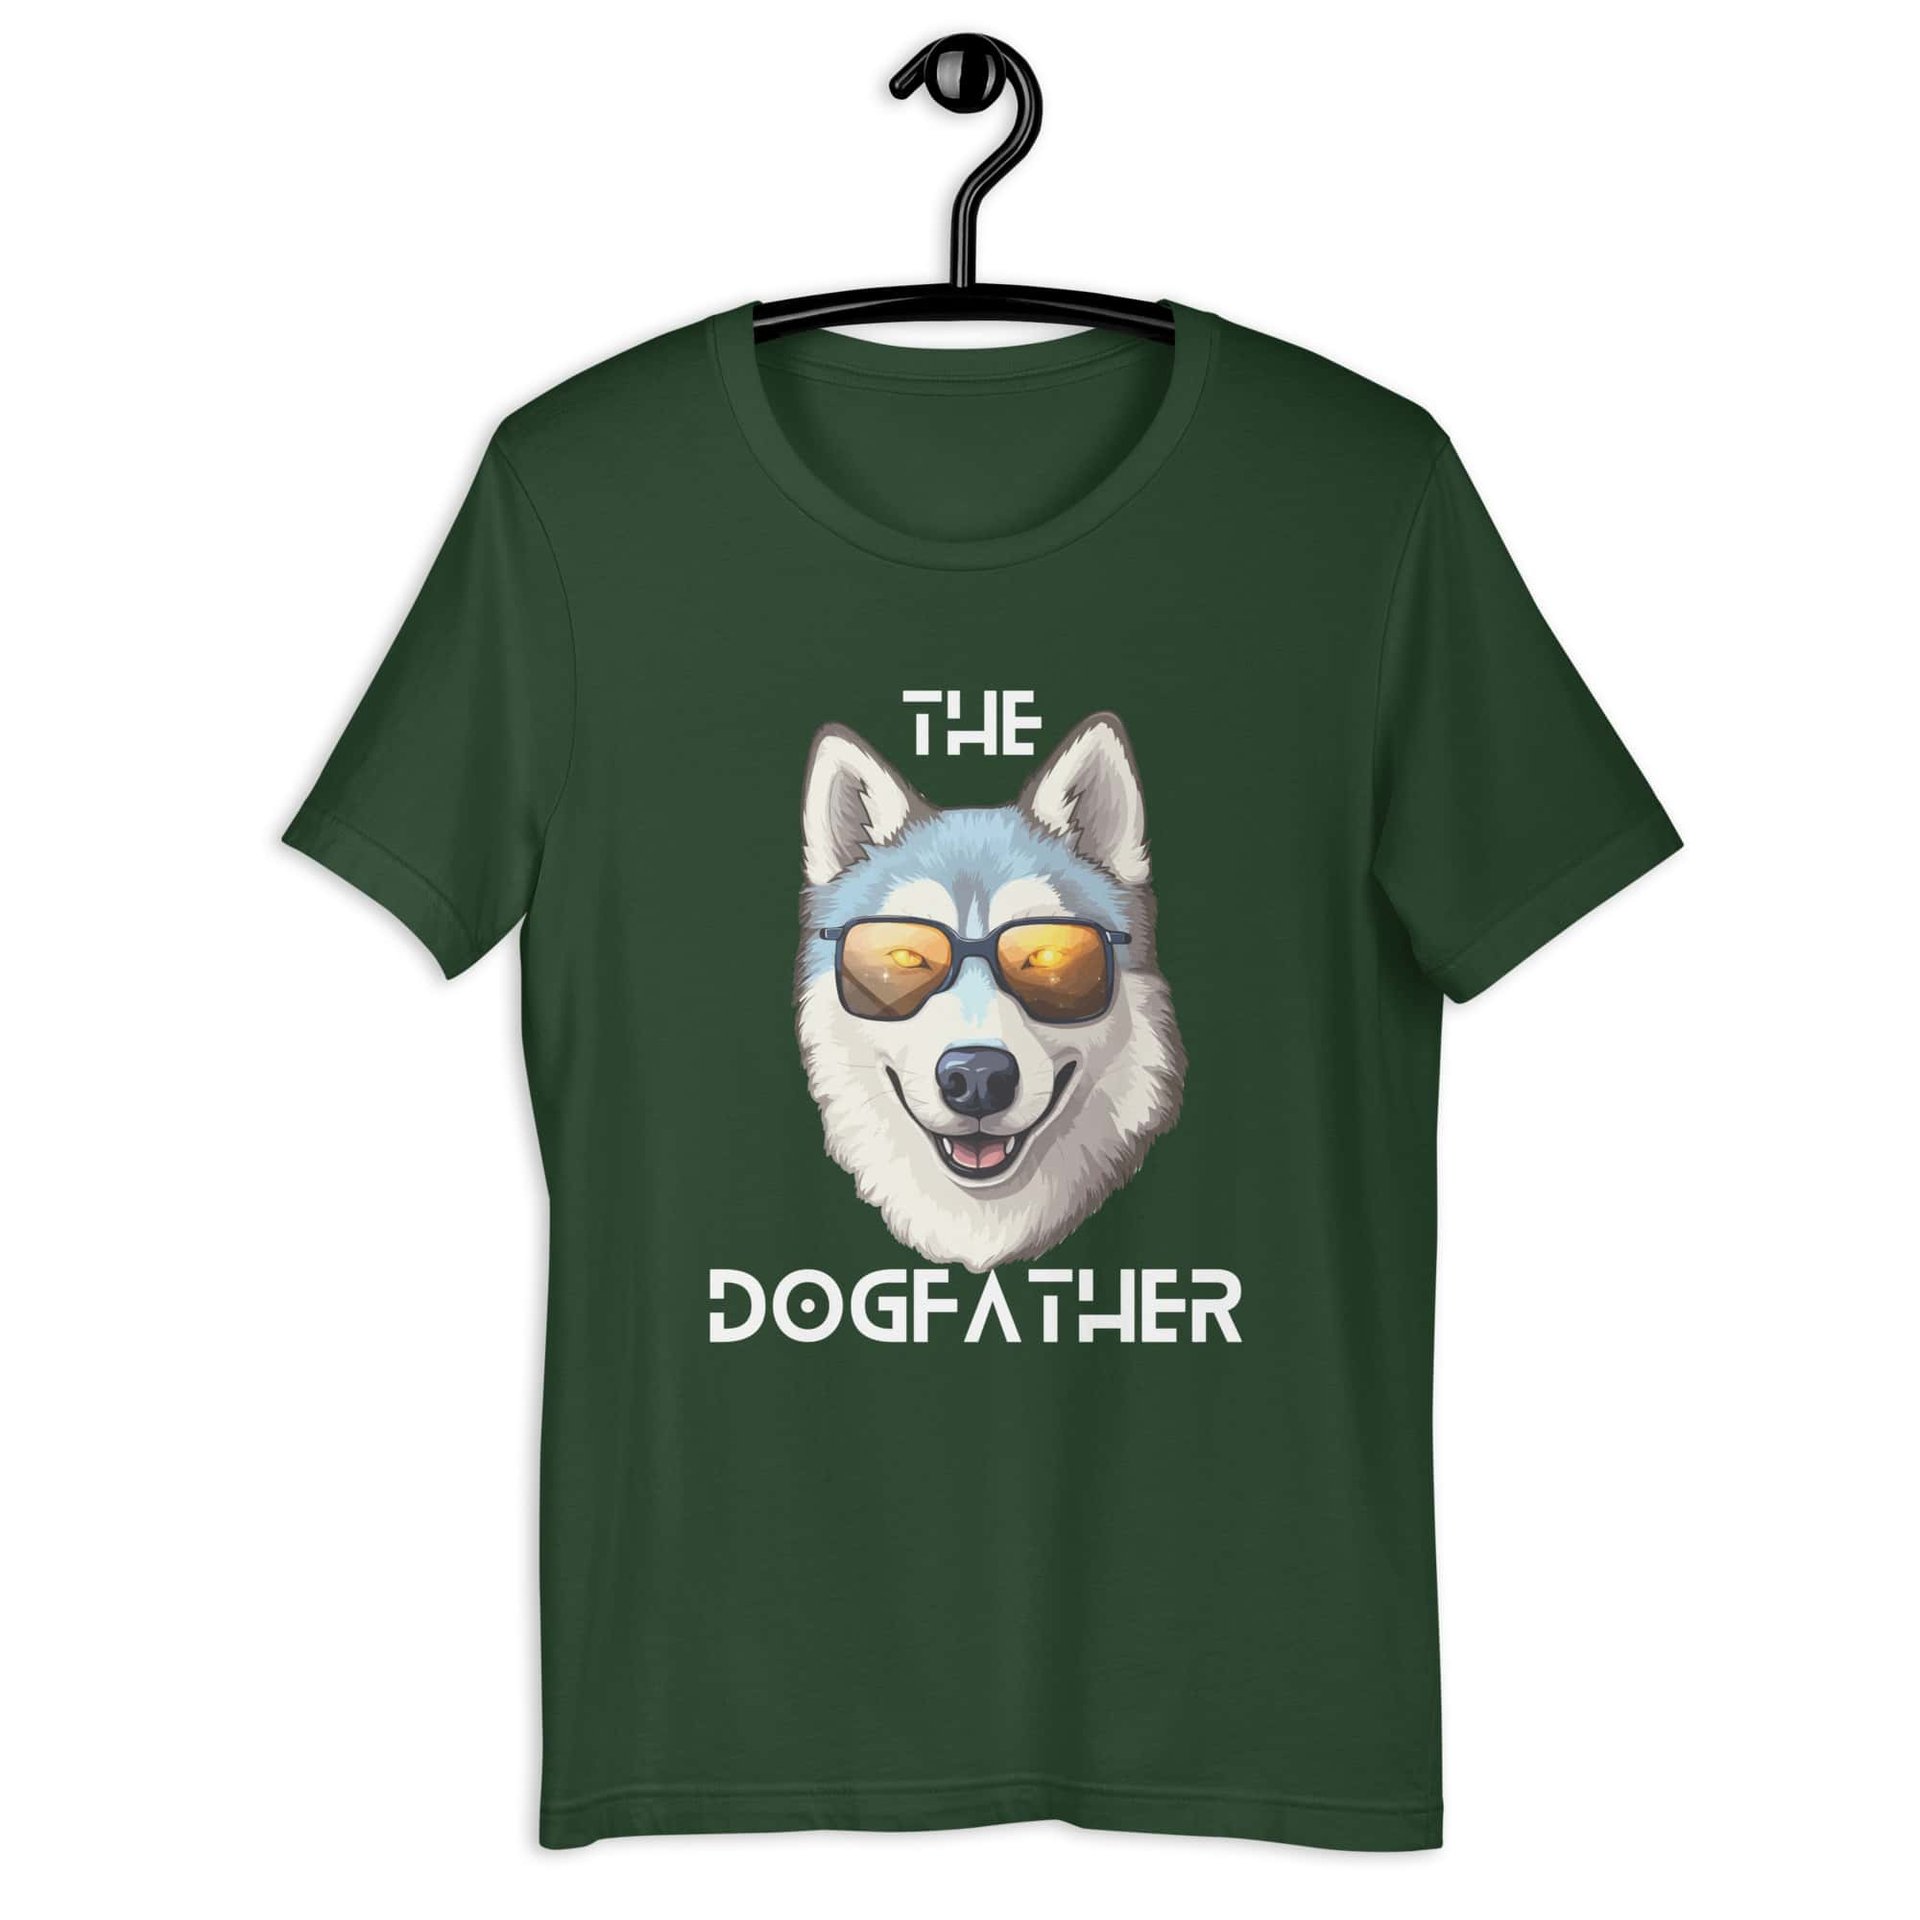 The Dogfather Huskies Unisex T-Shirt. Forest